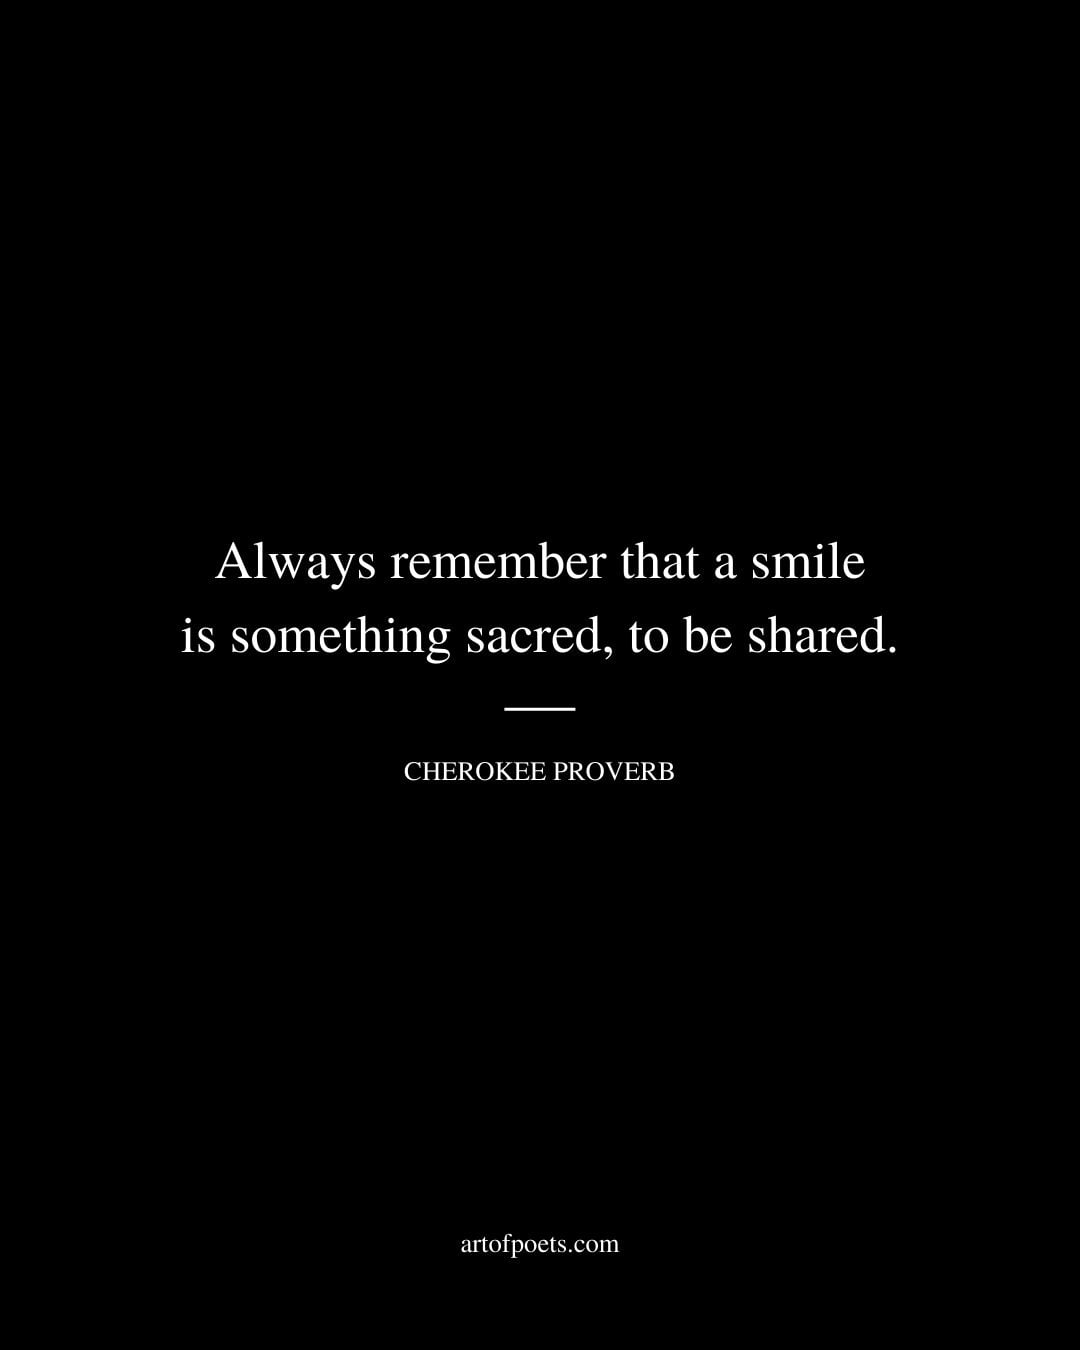 Always remember that a smile is something sacred to be shared